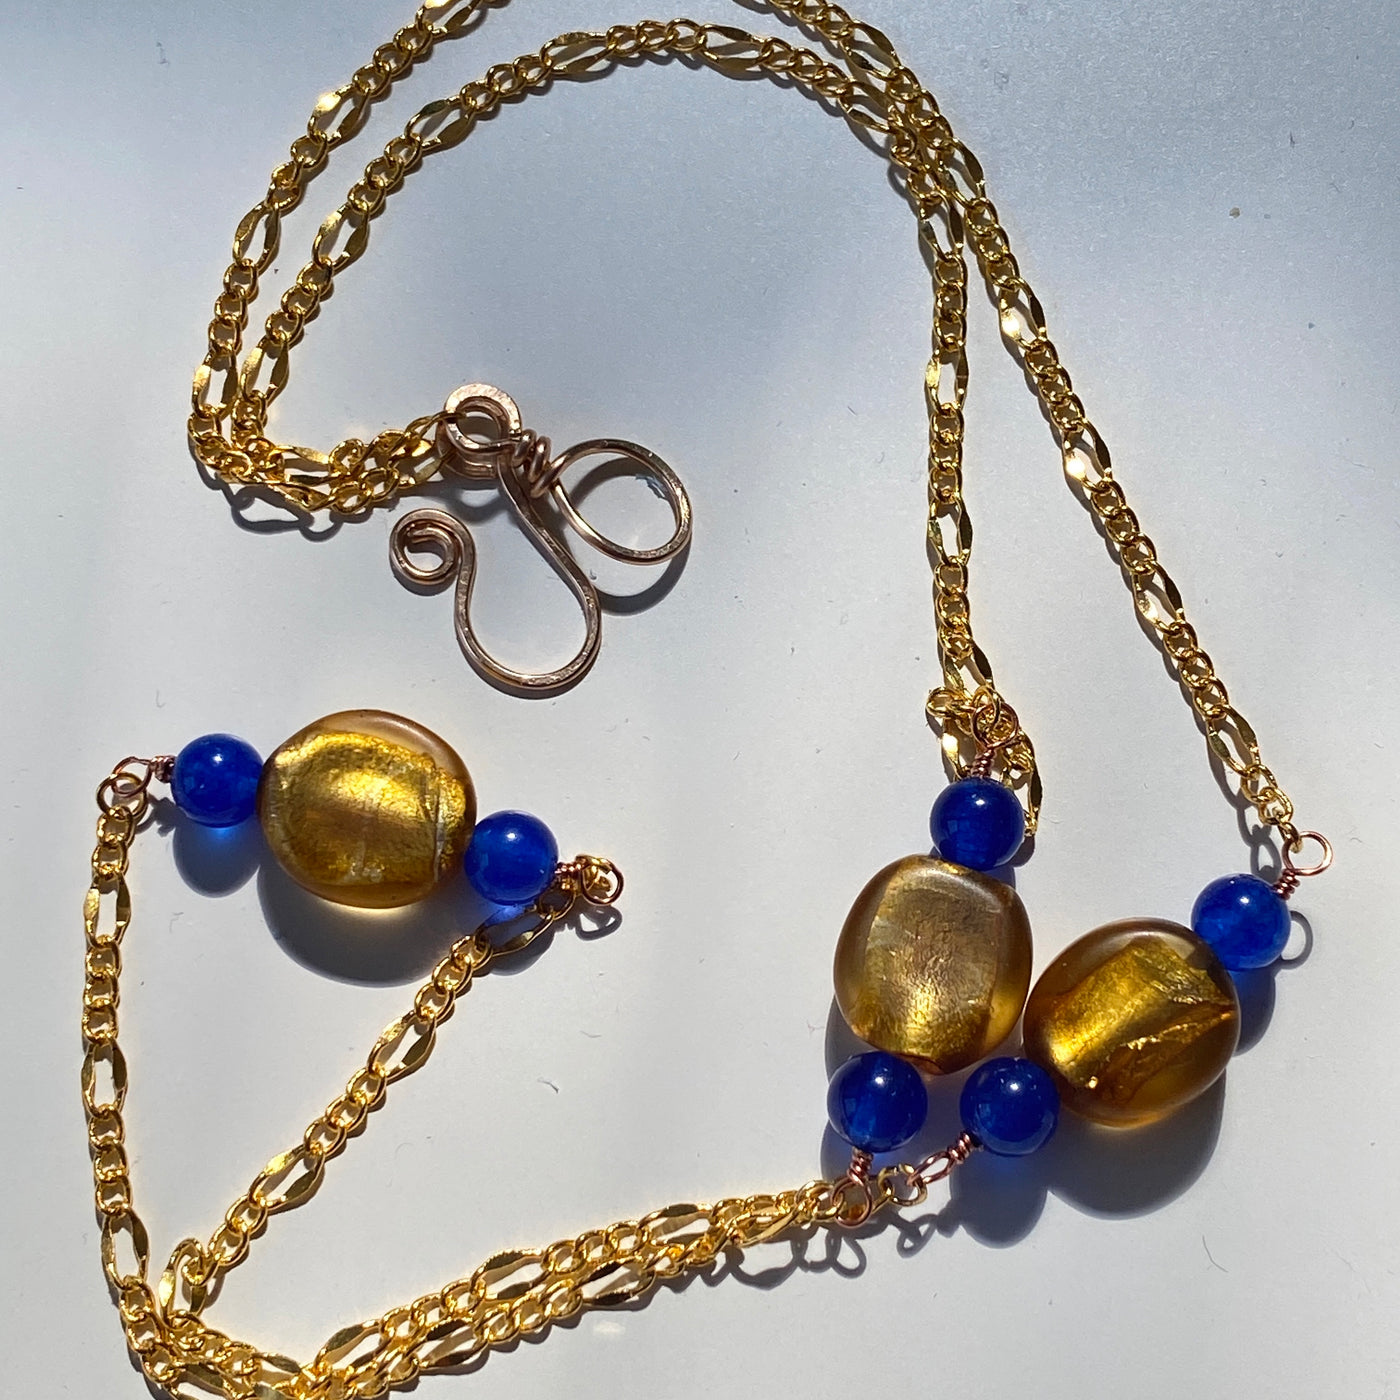 Golden glass beads and blue calchedony necklace. 